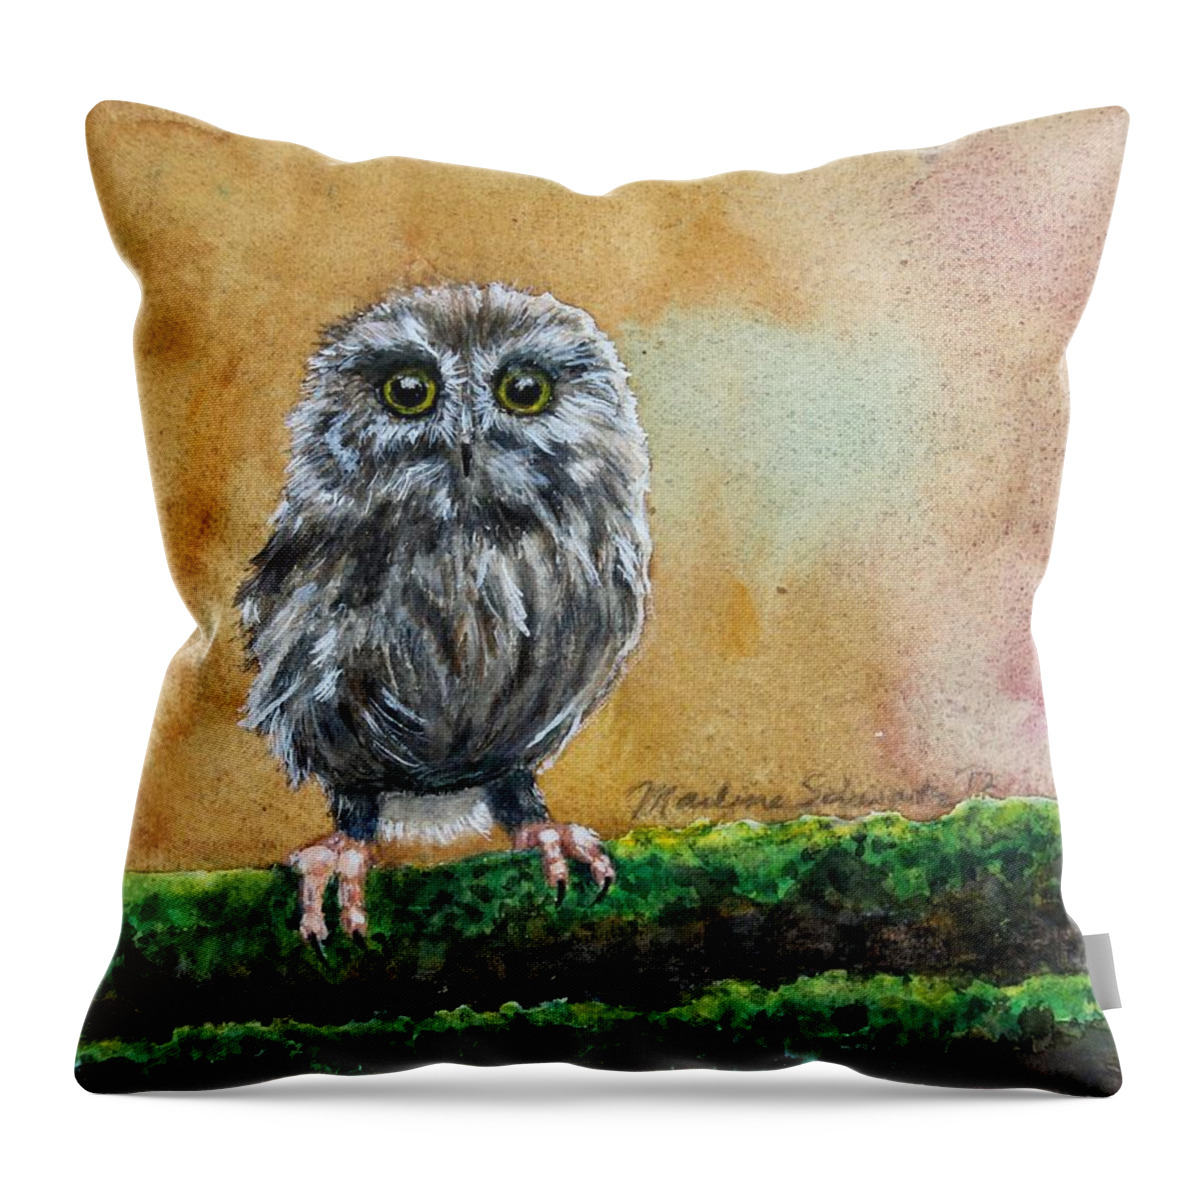 Owl Throw Pillow featuring the painting Small Wonder by Marlene Schwartz Massey